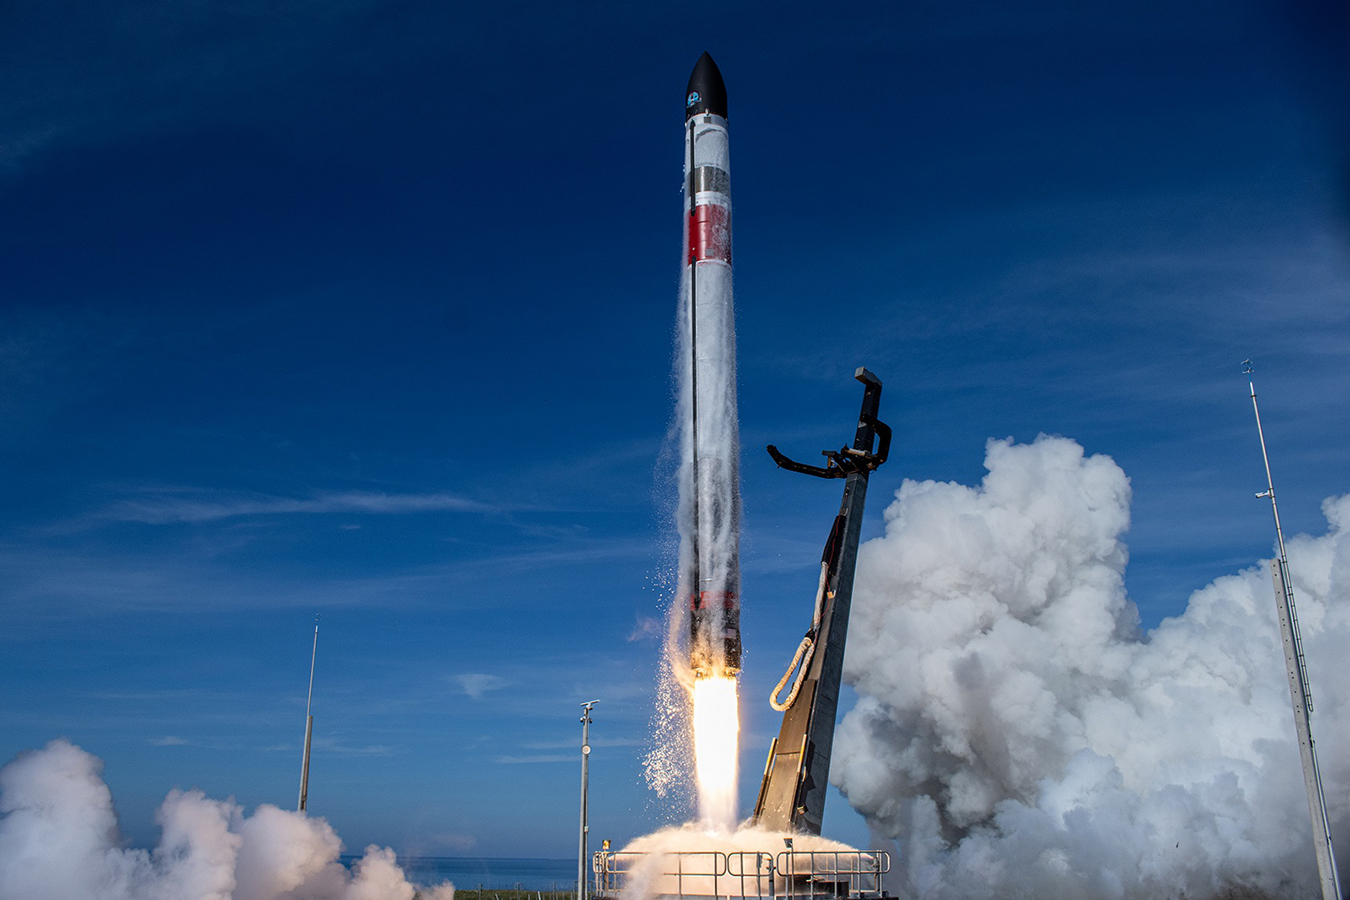 Rocket manufacturers face challenges in push for reusable launch vehicle  development - Aerospace America